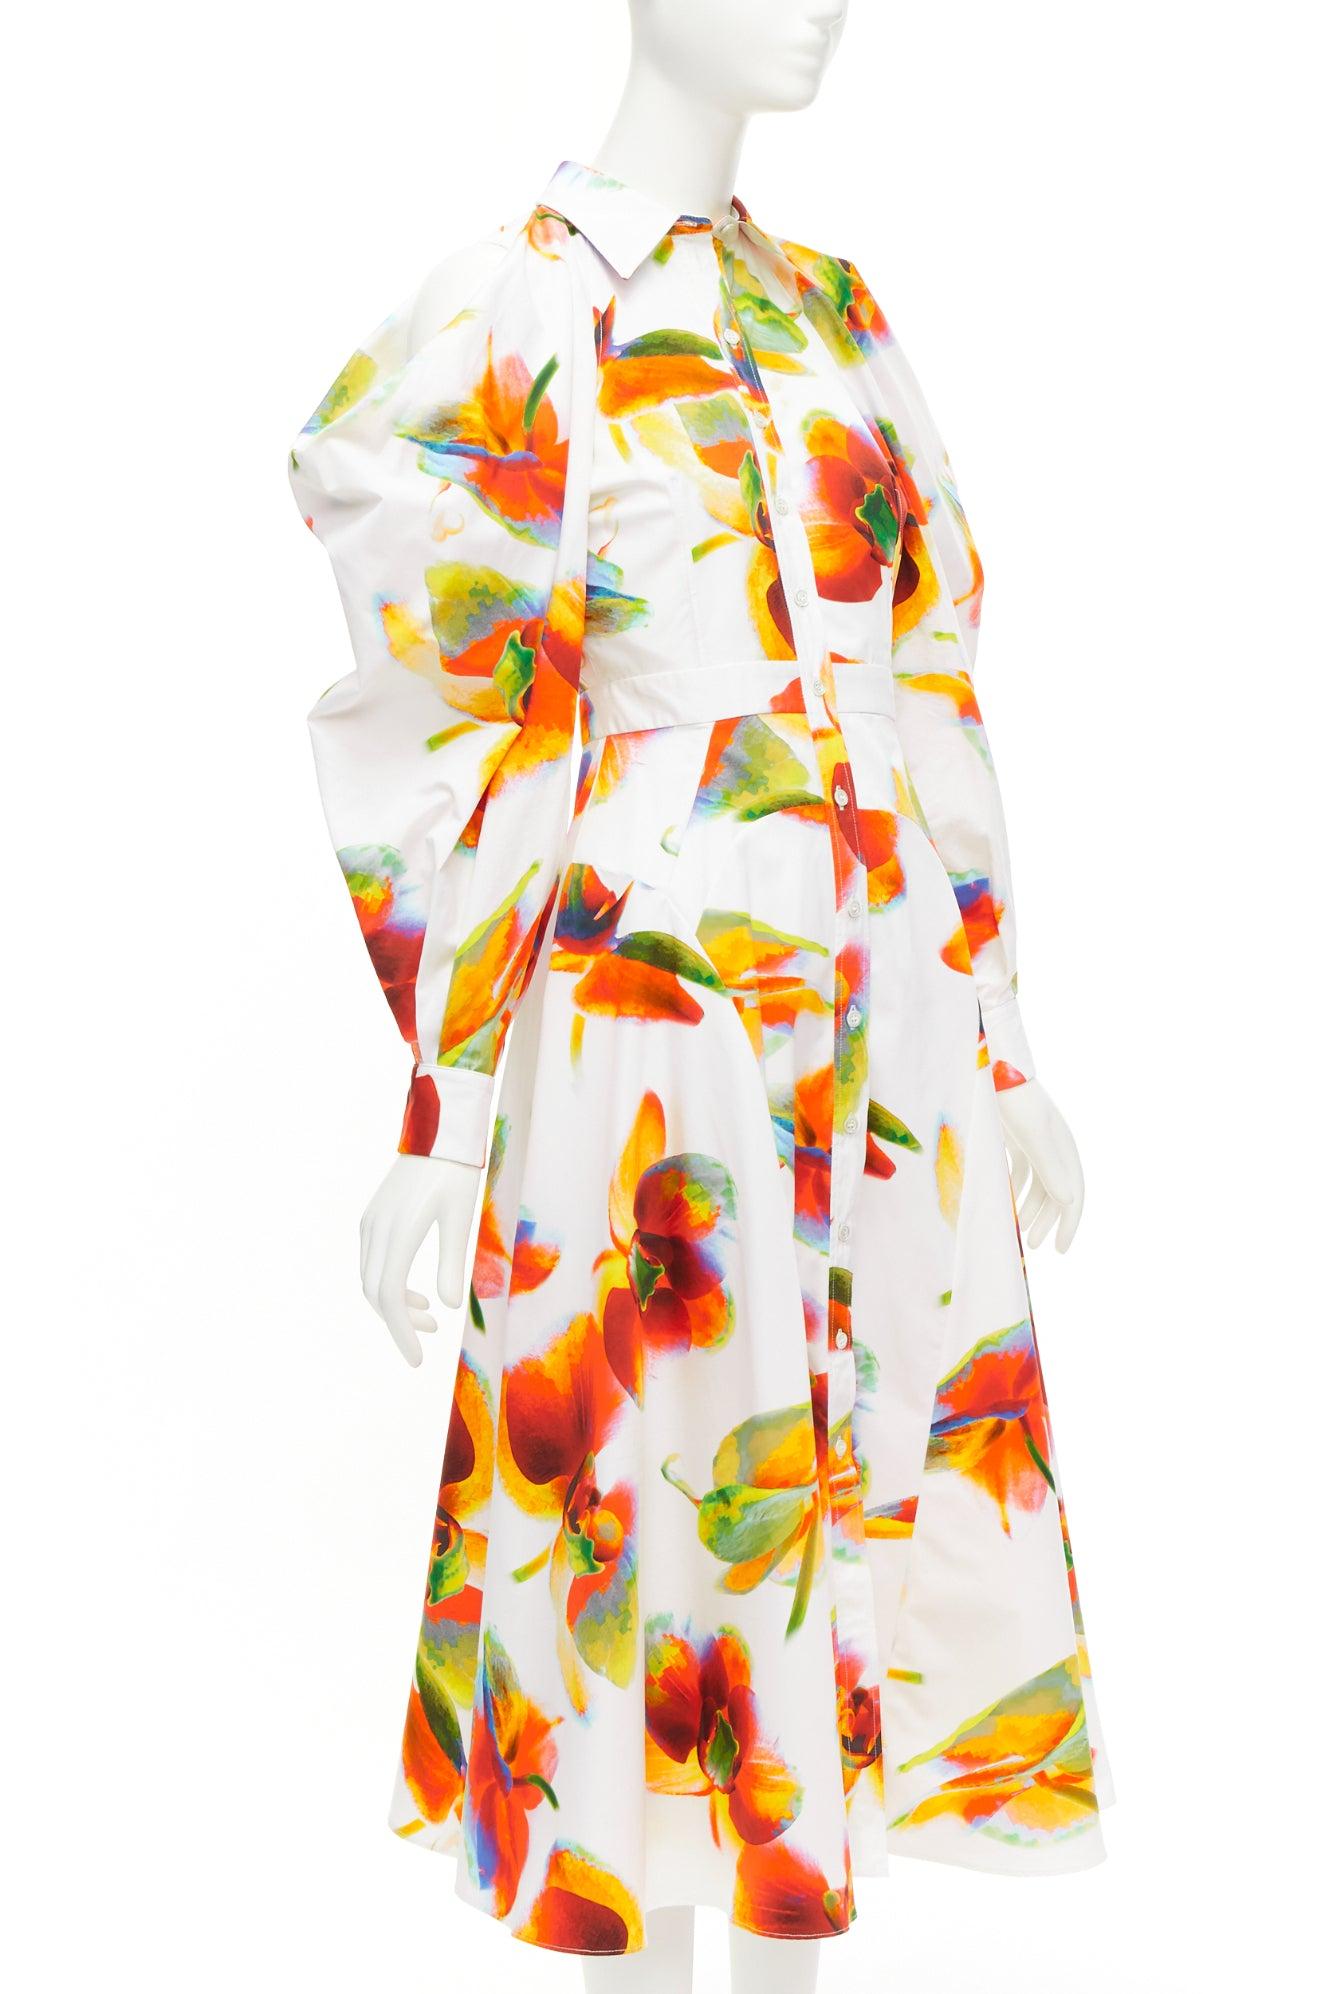 ALEXANDER MCQUEEN 2023 Solarised Orchid floral slash shoulder dress IT38 XS
Reference: AAWC/A00686
Brand: Alexander McQueen
Designer: Sarah Burton
Collection: 2023
Material: Cotton
Color: White, Multicolour
Pattern: Floral
Closure: Button
Extra